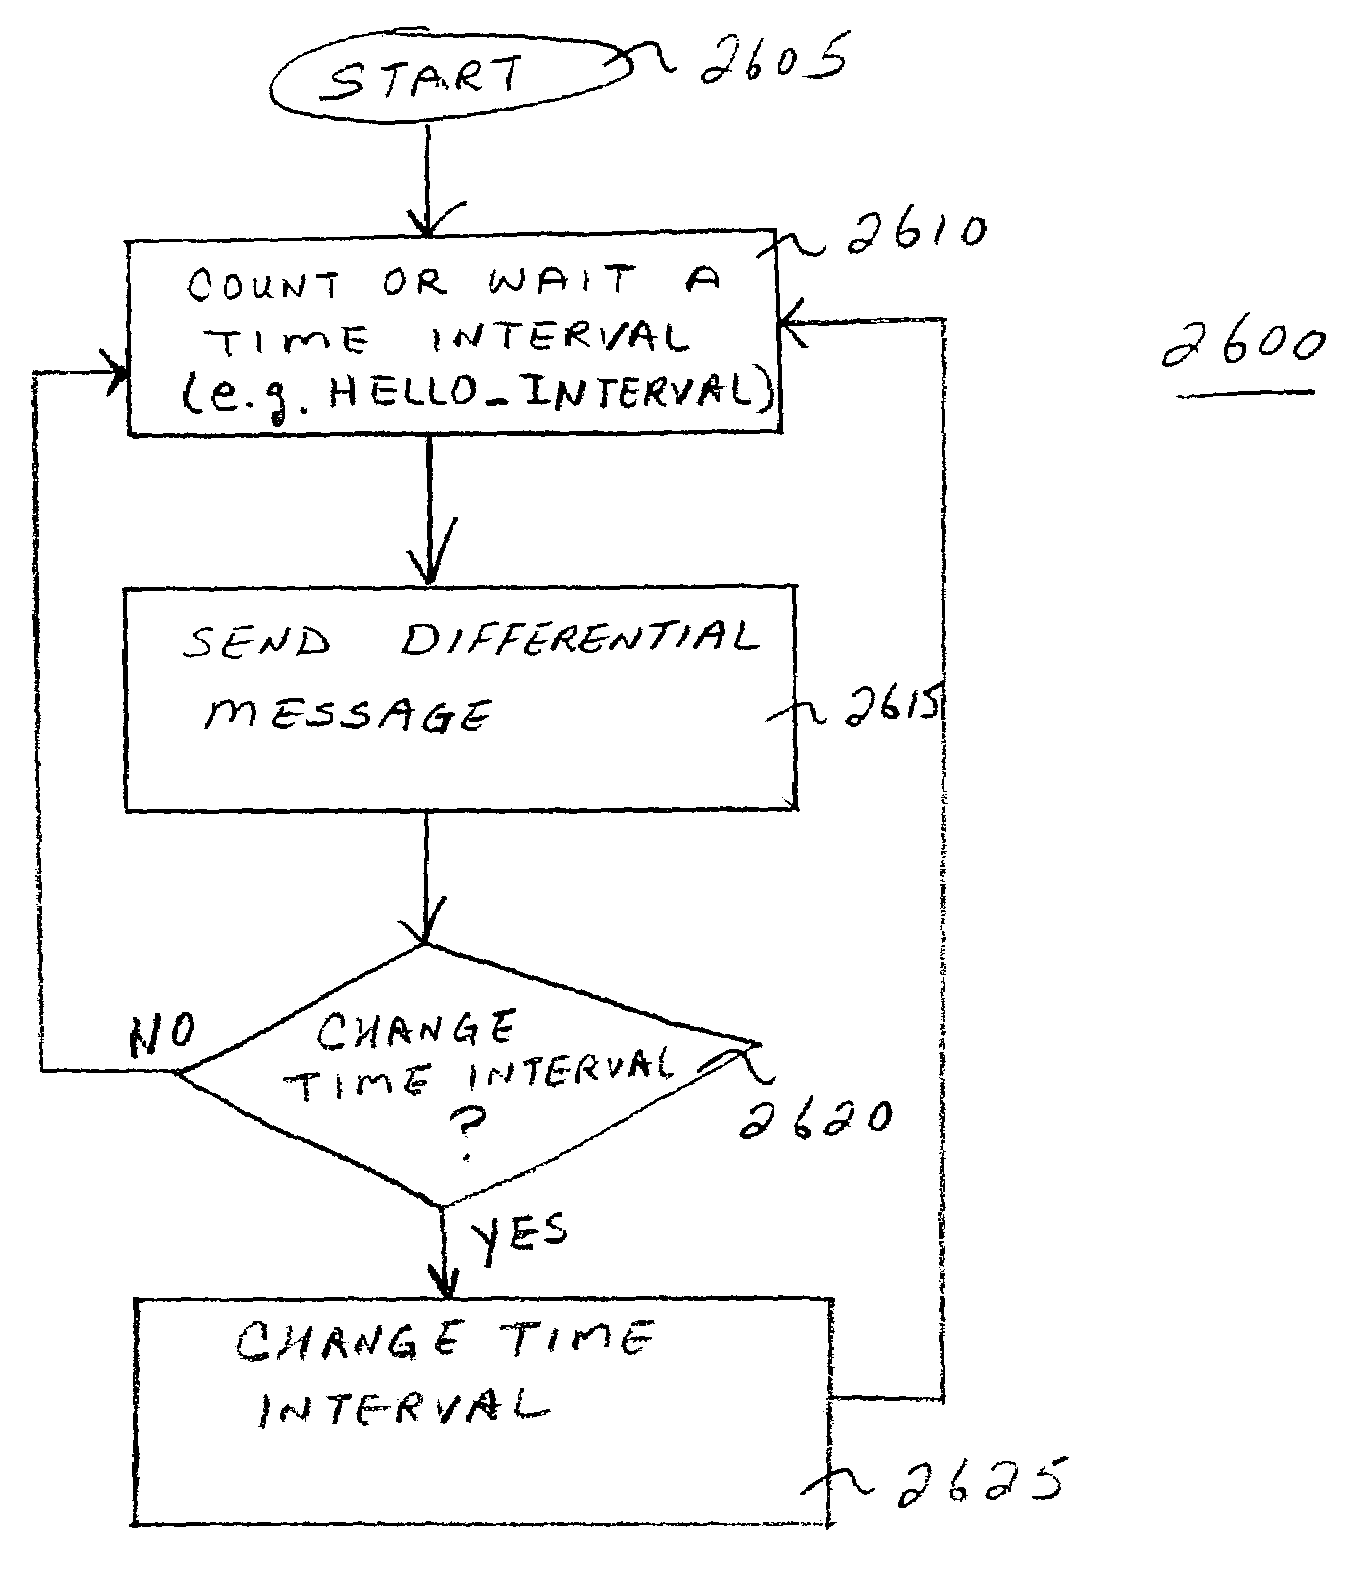 Method and apparatus for disseminating topology information and for discovering new neighboring nodes